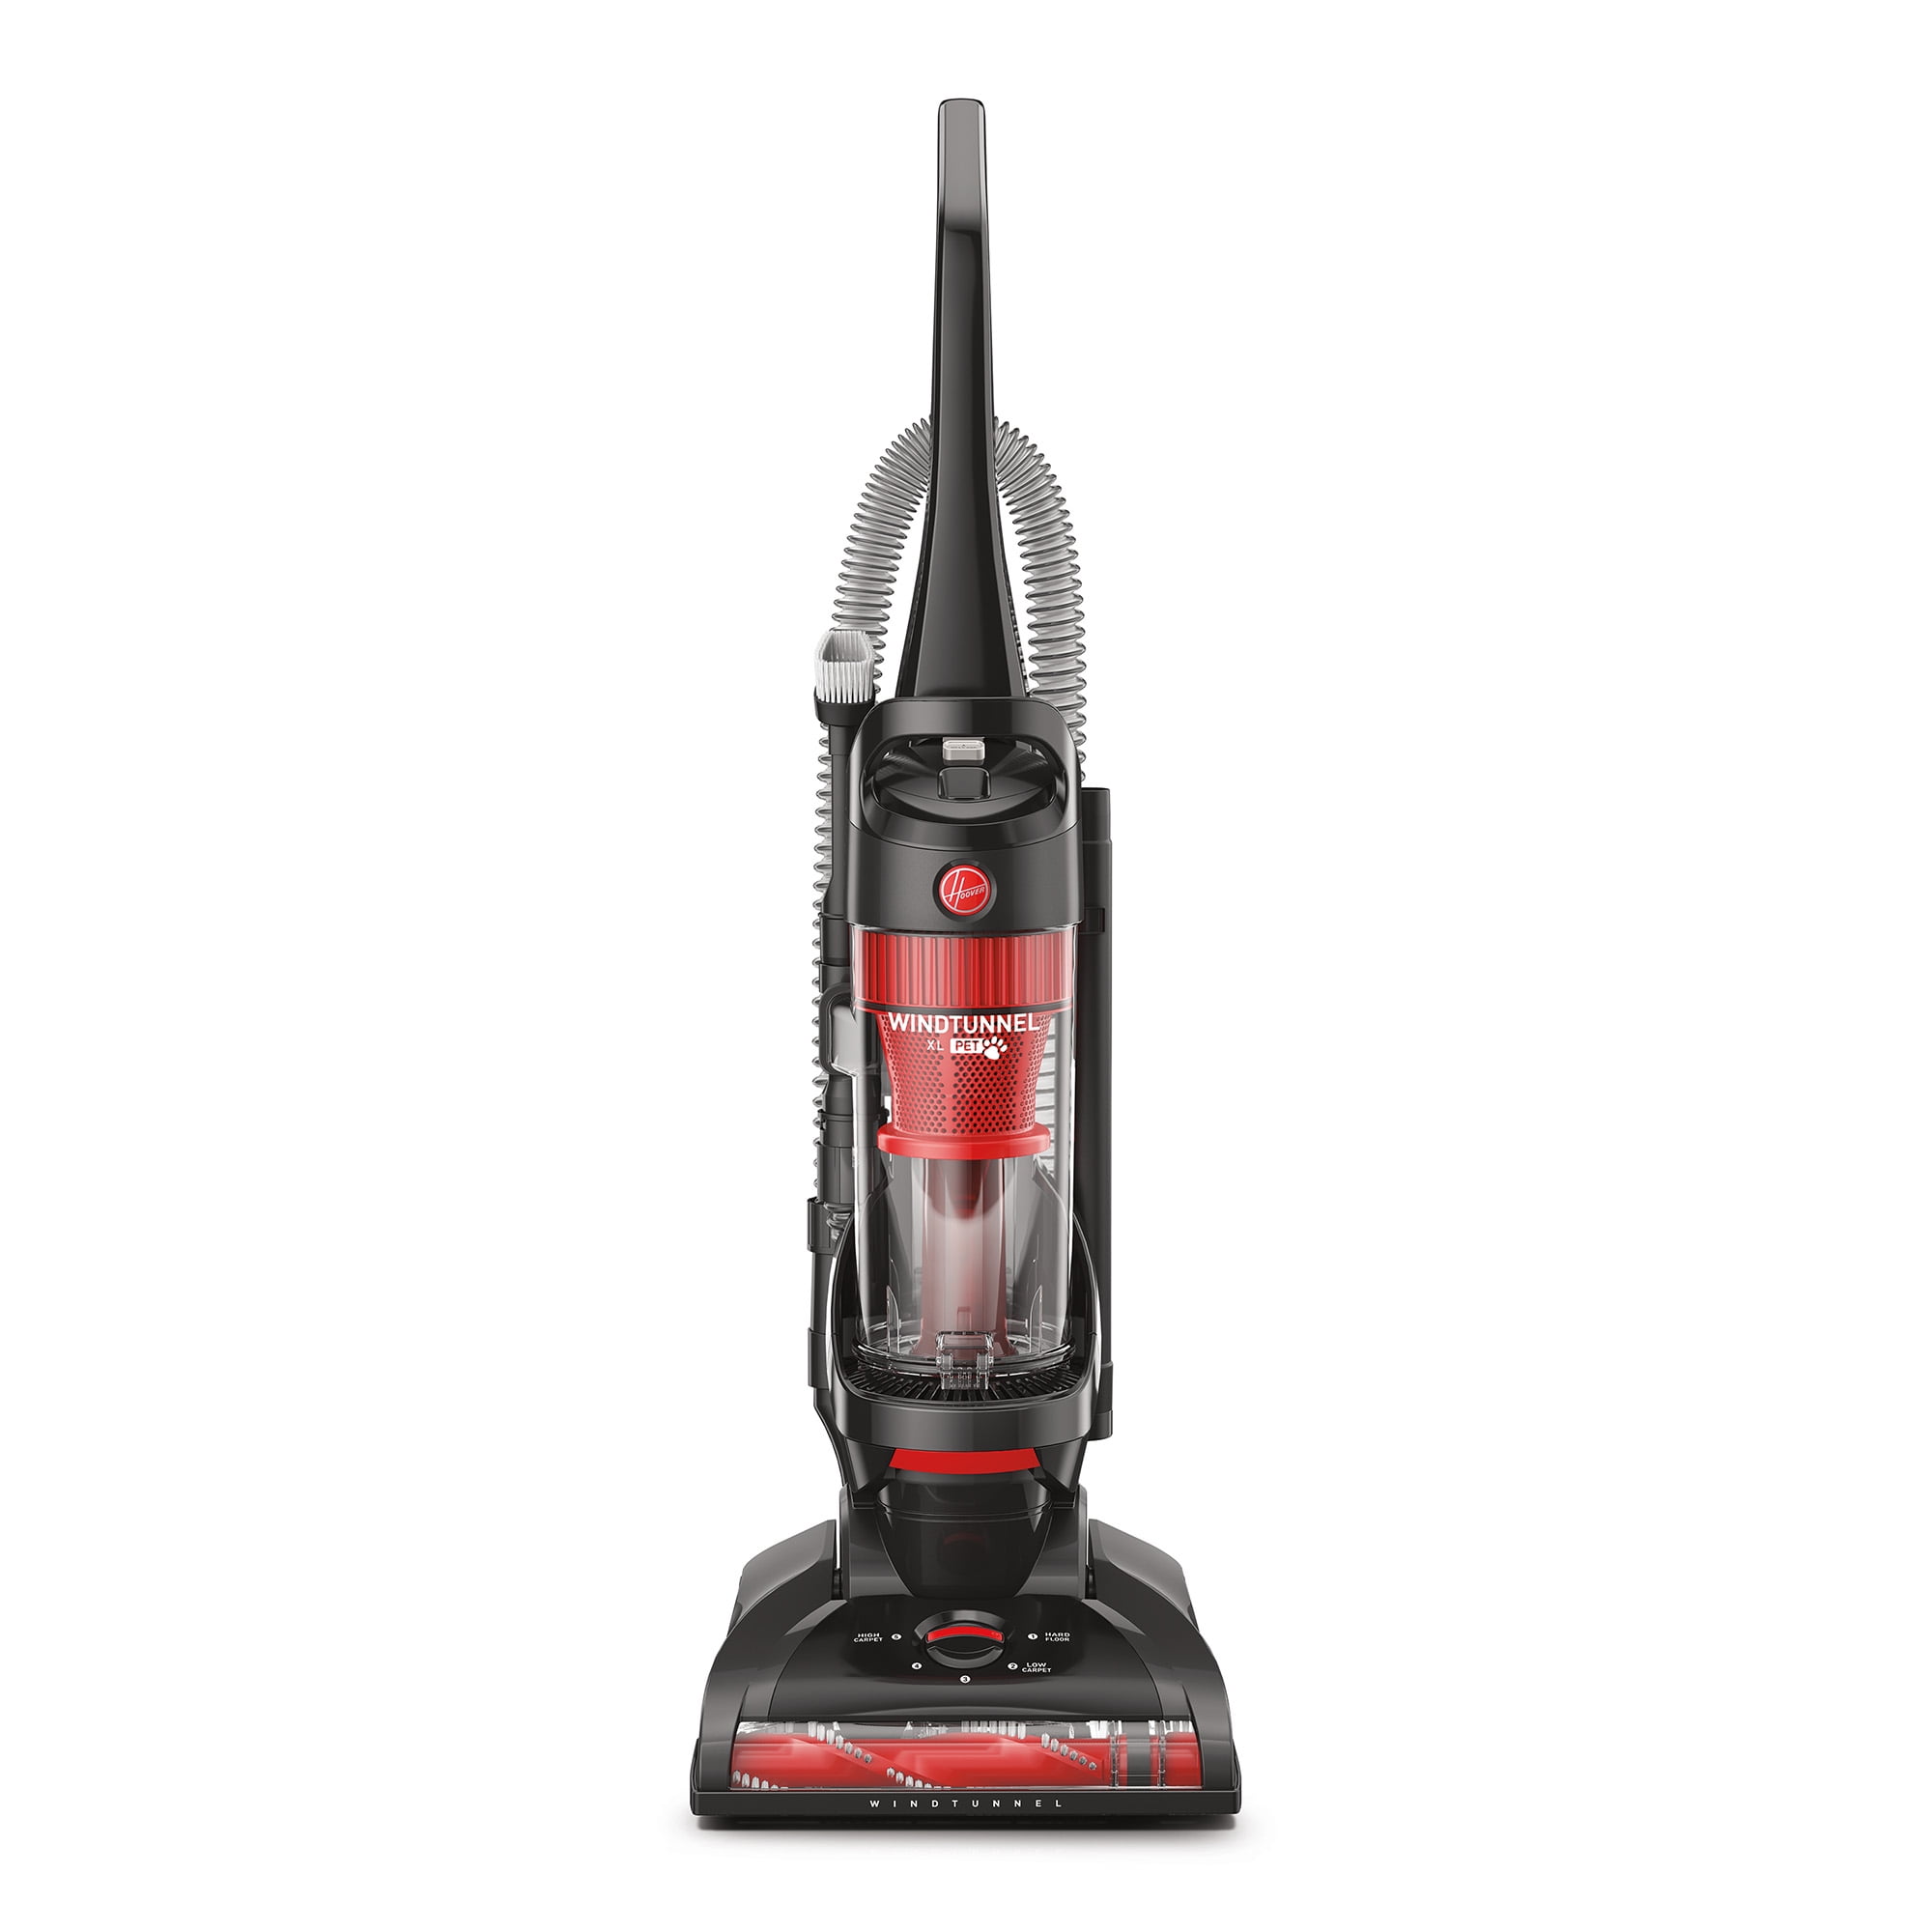 Hoover Wind Tunnel XL Pet Bagless Upright Vacuum $68 + Free Shipping